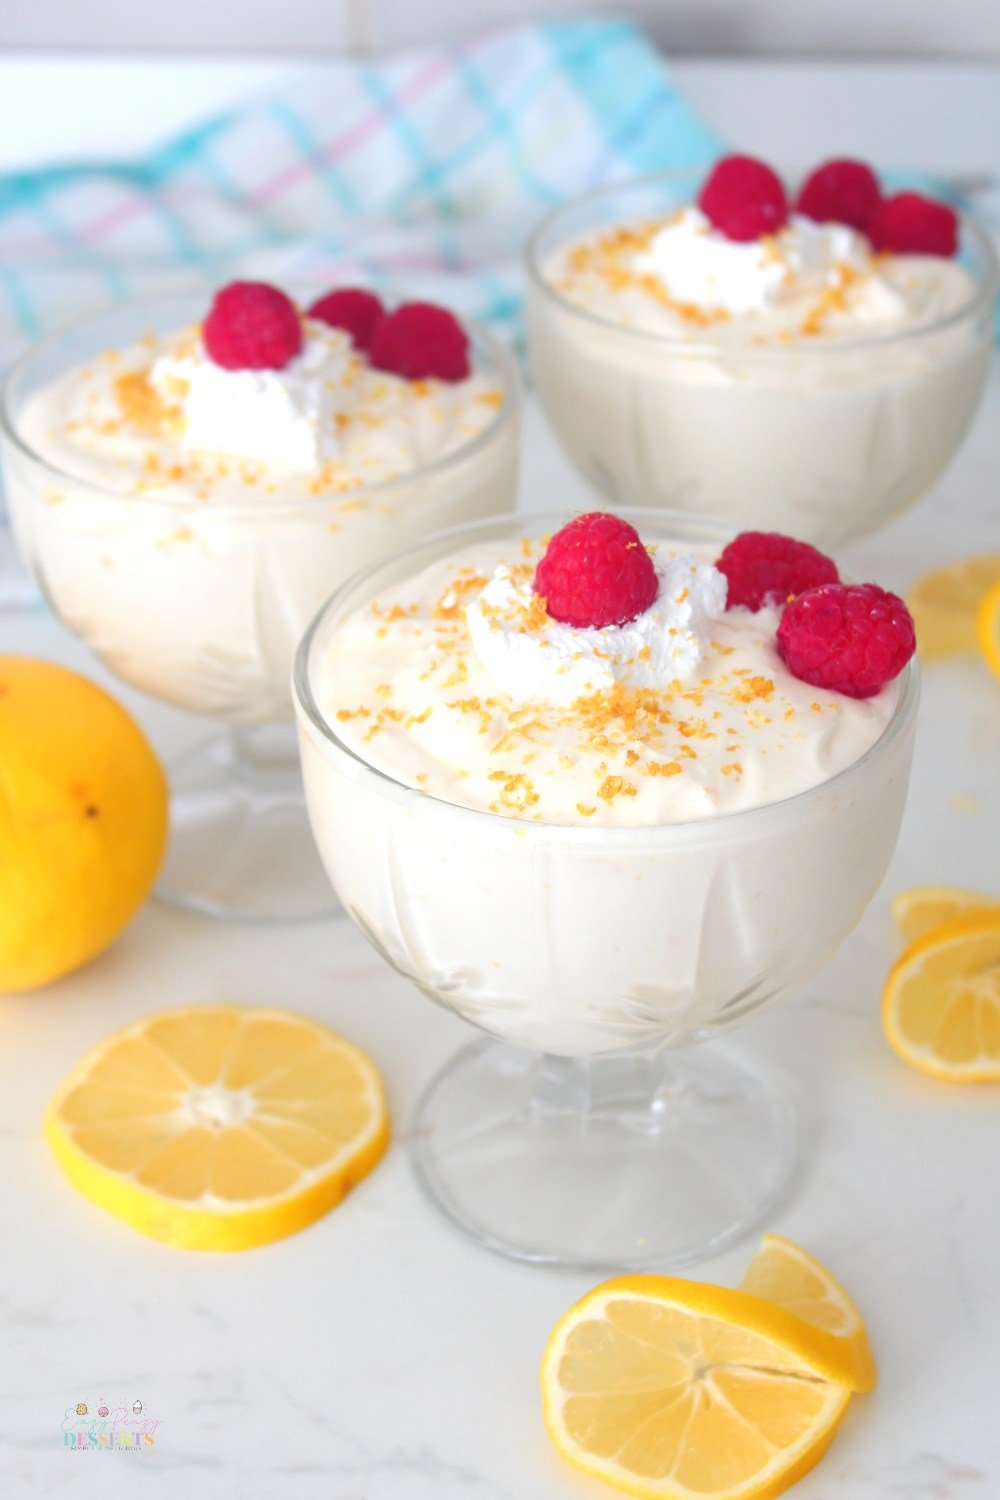 Image of three ice cream cups, filled with lemon mousse, decorated with raspberries, whipped cream, lemon zest and lemon slices